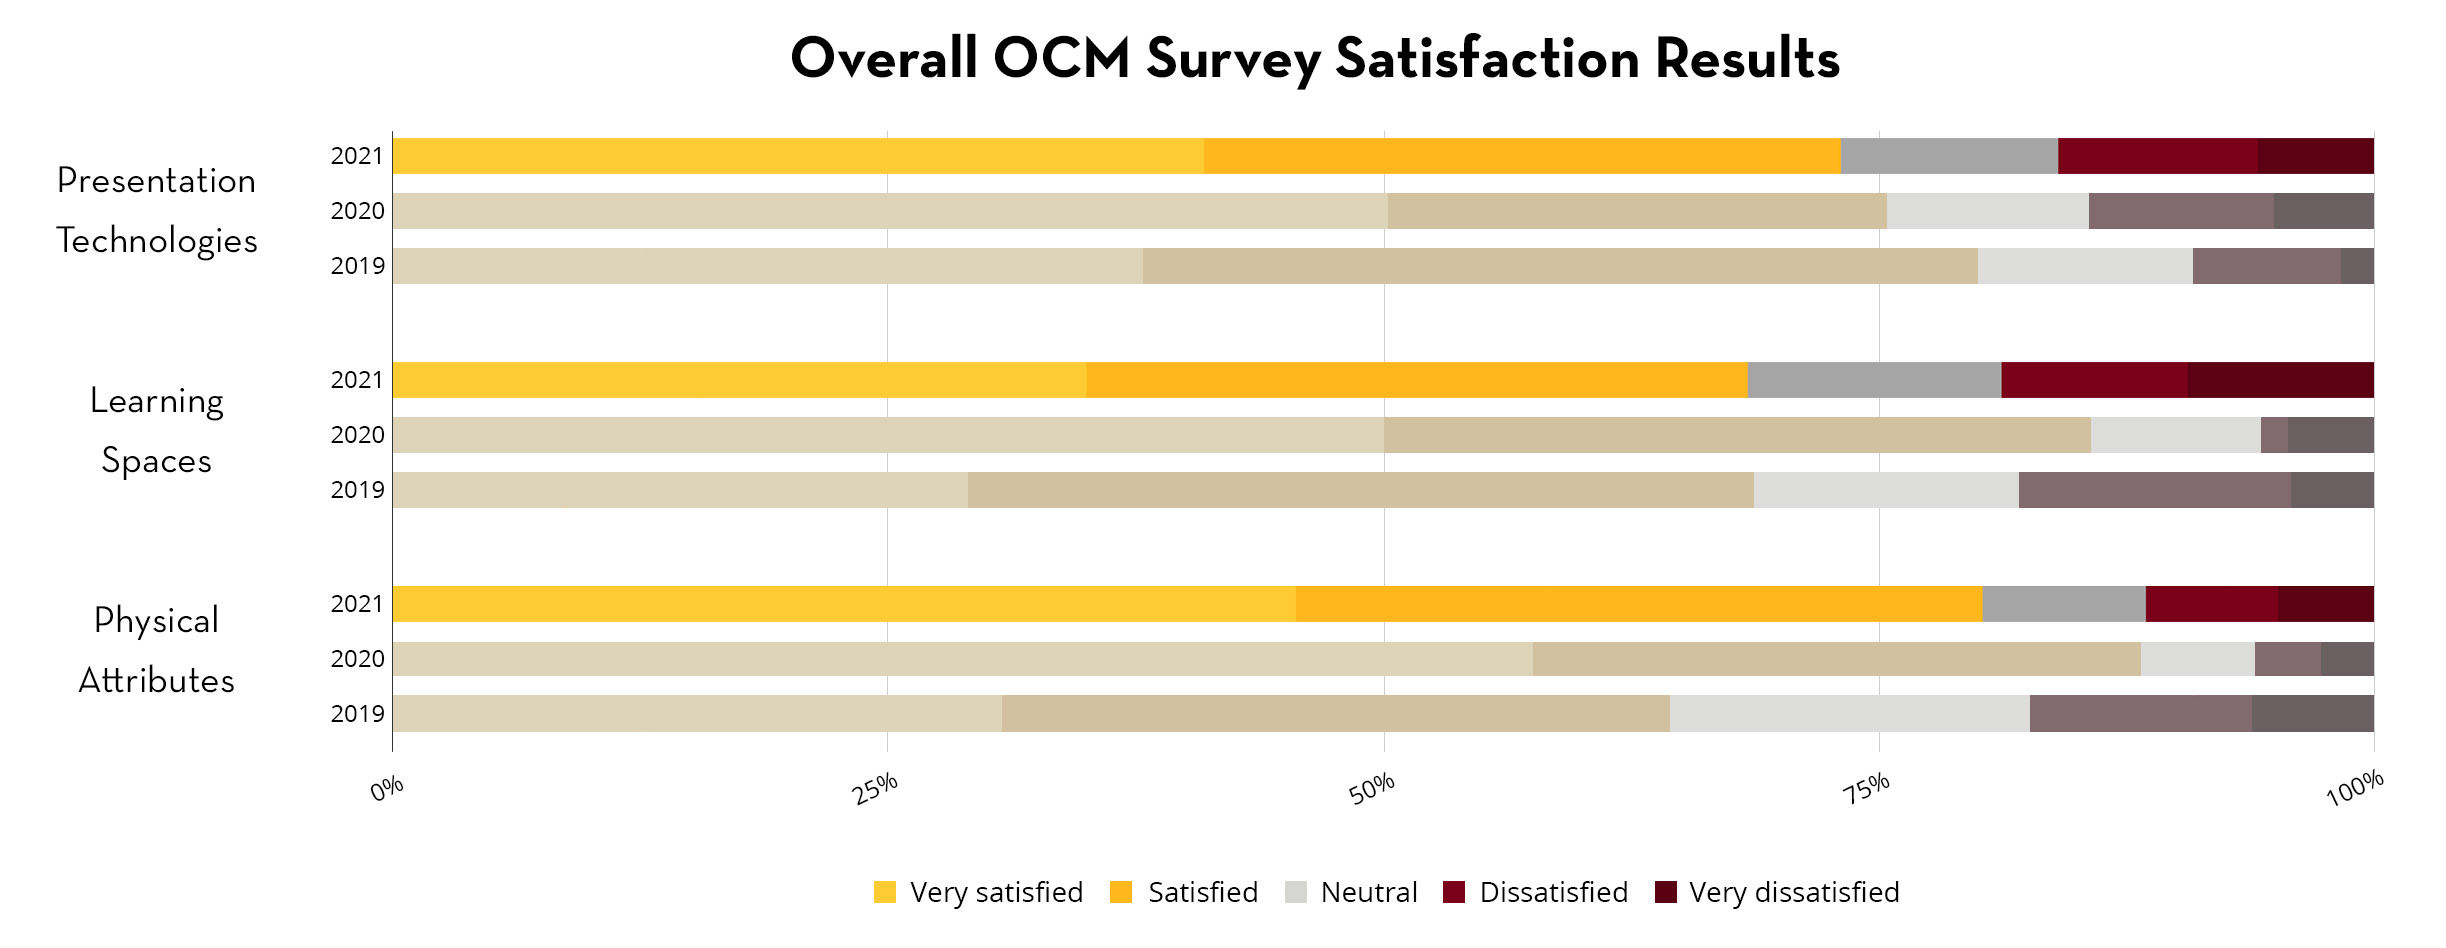 Overall OCM Survey Satisfaction Results between 2019 and 2021